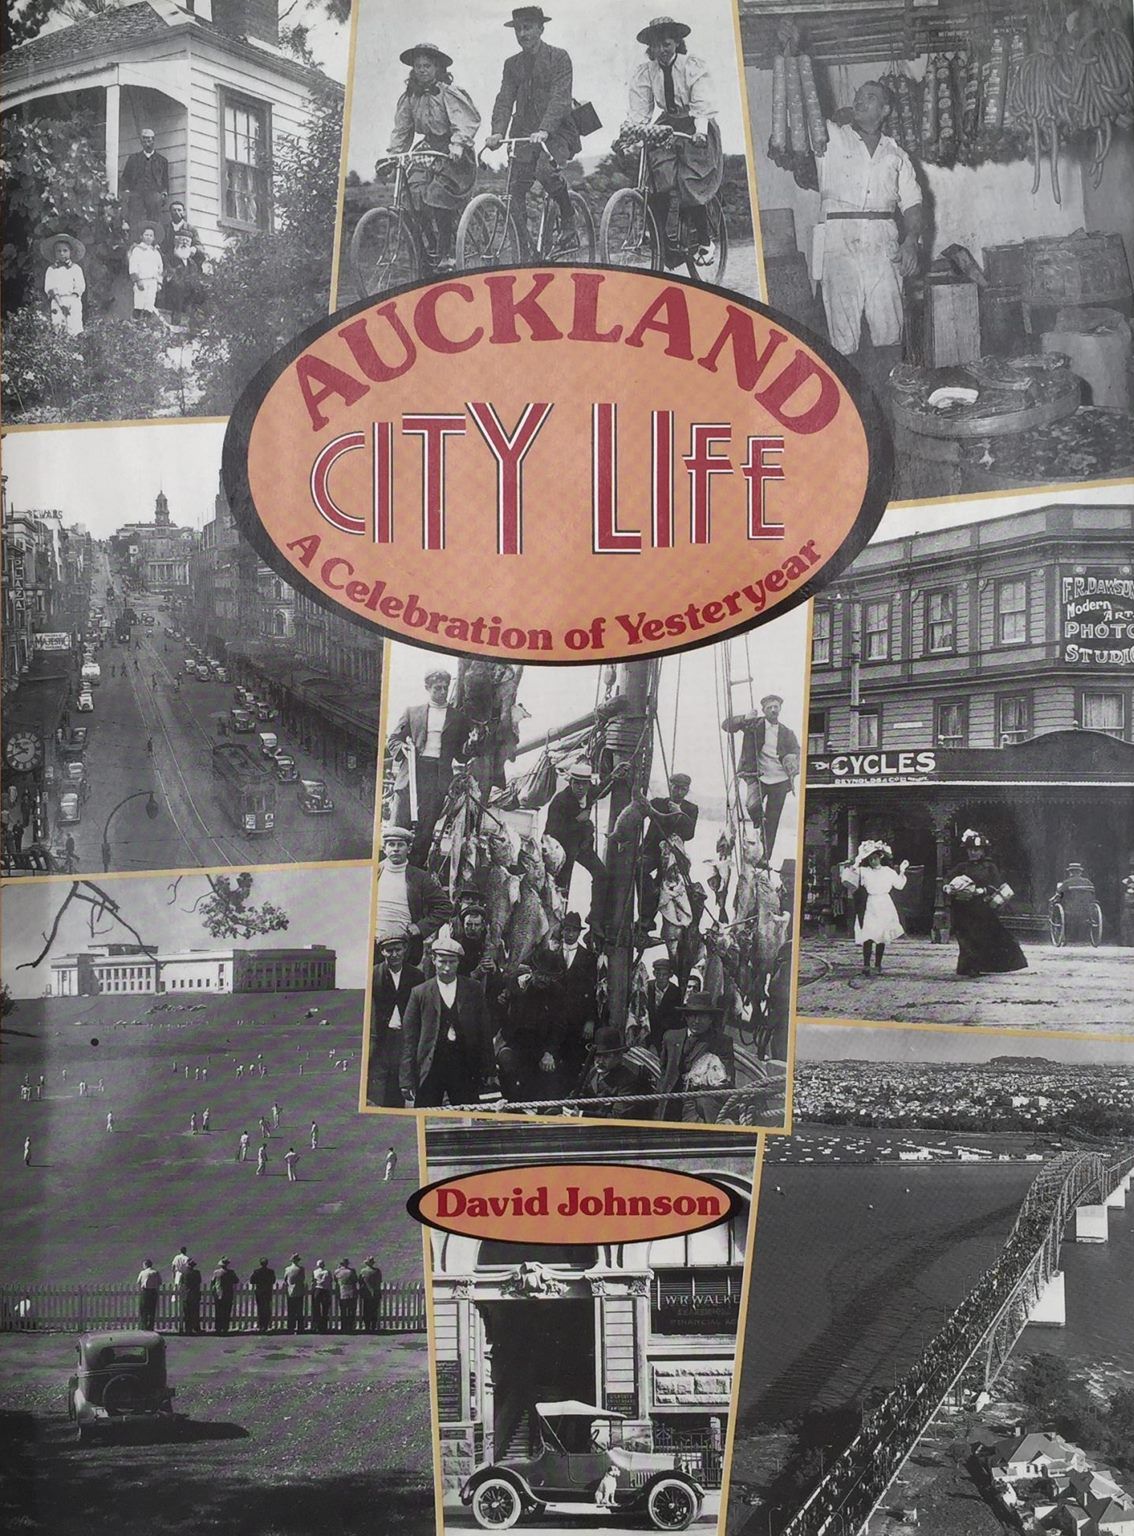 AUCKLAND CITY LIFE: A Celebration of Yesteryear